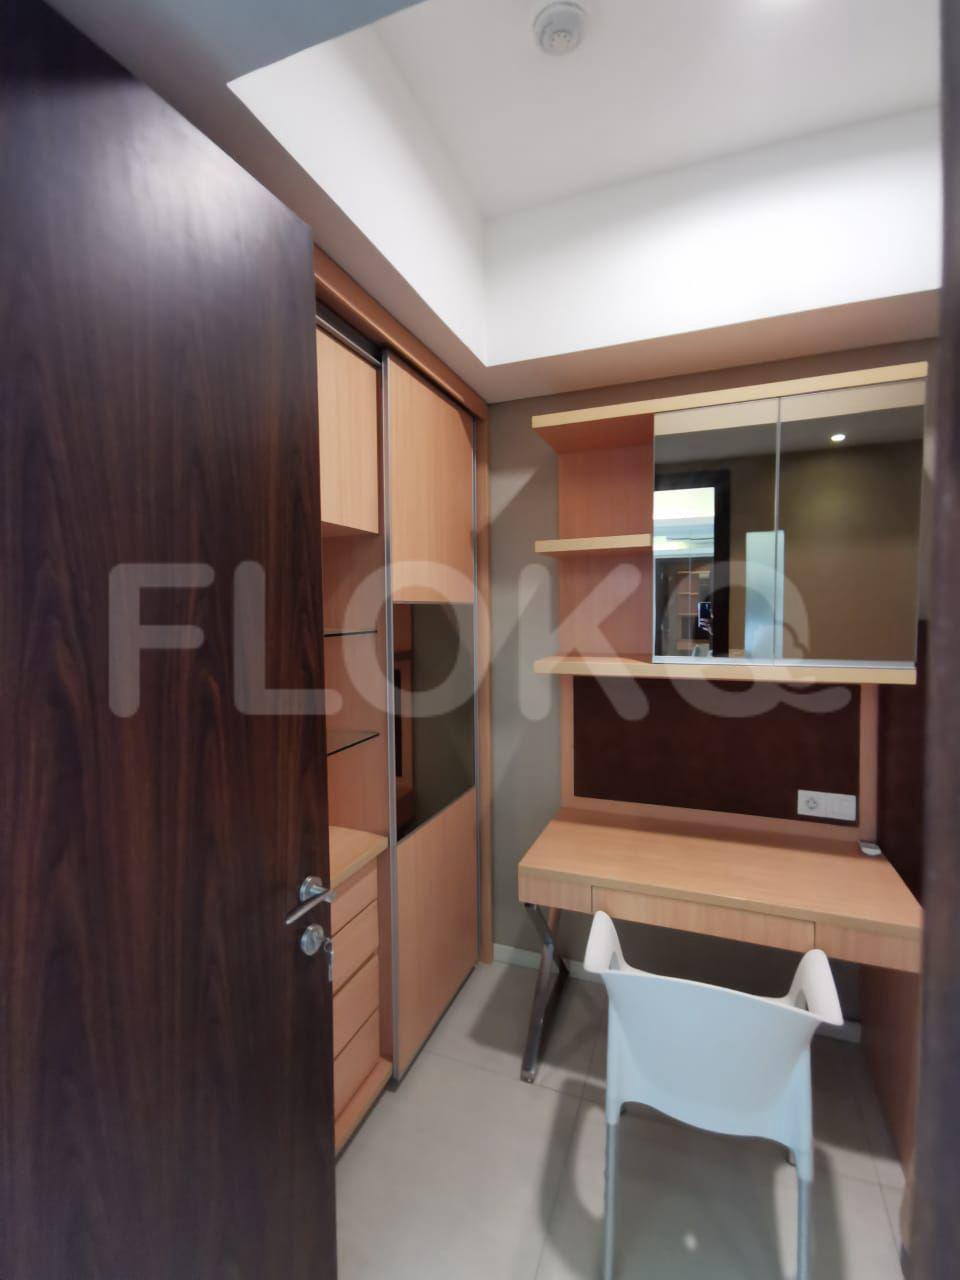 2 Bedroom on 26th Floor fkea2f for Rent in Kemang Village Residence